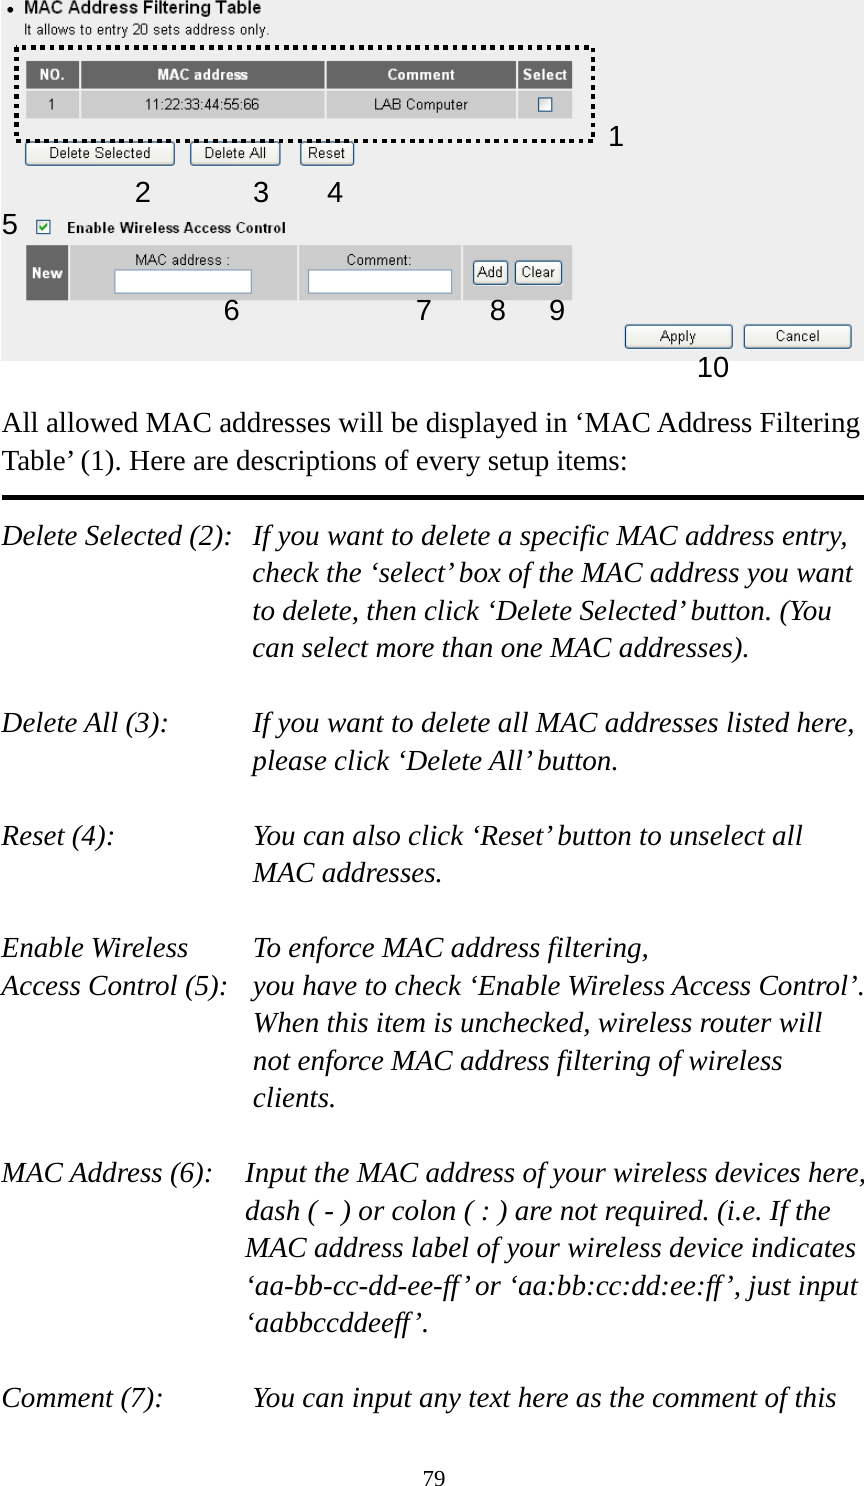 79   All allowed MAC addresses will be displayed in ‘MAC Address Filtering Table’ (1). Here are descriptions of every setup items:  Delete Selected (2):   If you want to delete a specific MAC address entry, check the ‘select’ box of the MAC address you want to delete, then click ‘Delete Selected’ button. (You can select more than one MAC addresses).  Delete All (3):    If you want to delete all MAC addresses listed here, please click ‘Delete All’ button.  Reset (4):    You can also click ‘Reset’ button to unselect all MAC addresses.  Enable Wireless    To enforce MAC address filtering, Access Control (5):   you have to check ‘Enable Wireless Access Control’. When this item is unchecked, wireless router will not enforce MAC address filtering of wireless clients.  MAC Address (6):    Input the MAC address of your wireless devices here, dash ( - ) or colon ( : ) are not required. (i.e. If the MAC address label of your wireless device indicates ‘aa-bb-cc-dd-ee-ff’ or ‘aa:bb:cc:dd:ee:ff’, just input ‘aabbccddeeff’.  Comment (7):      You can input any text here as the comment of this   12 3 46789105 